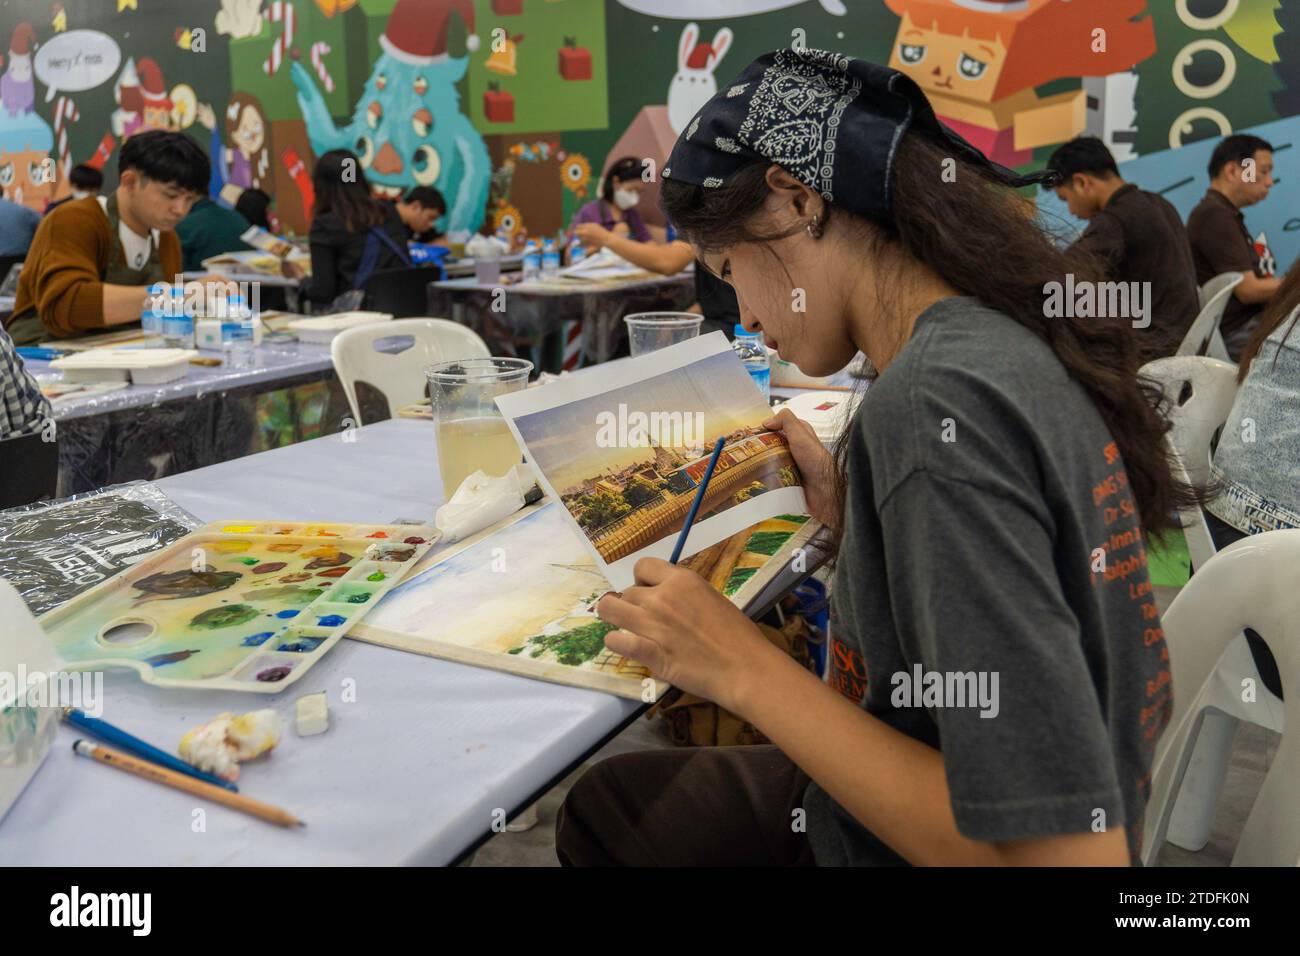 A participant is seen reproducing an image with watercolor painting, at the “BEM Art Contest" watercolor painting contest, at MRT Phahon Yothin station. The “Metro Art” at the MRT Phahon Yothin, developed by Bangkok Expressway and Metro Public (BEM), Bangkok Metro Networks Limited (BMN), and supported by the Tourism Authority of Thailand (TAT) is the new Art Space and Art Destination in the city’s heart as the MRT Phahon Yothin station connects to all areas of Bangkok, where visitors can learn arts in various fields, shop and sell works of art. (Photo by Nathalie Jamois / SOPA Images/Sipa USA) Stock Photo